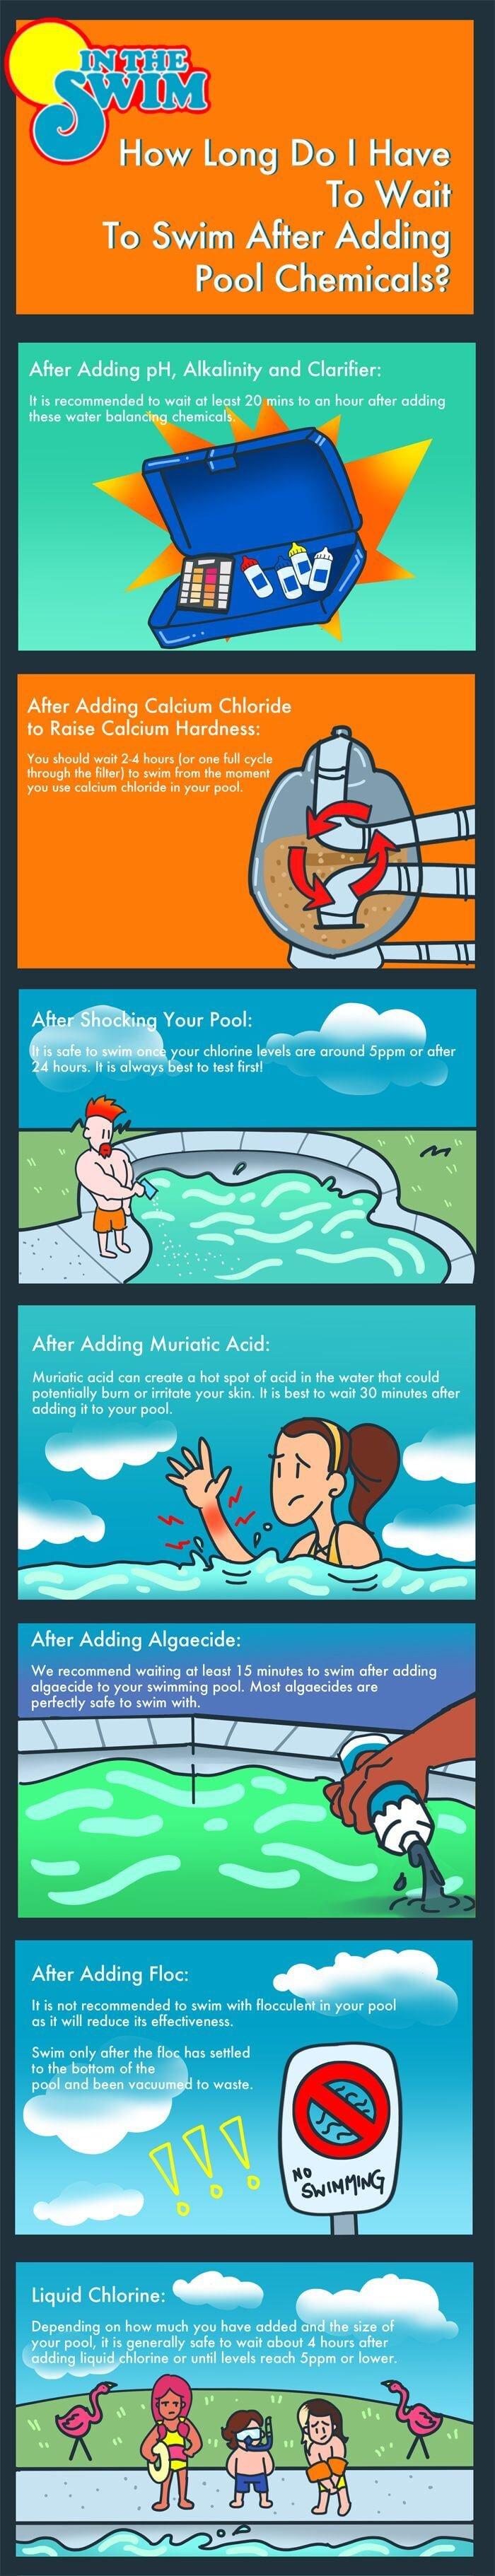 when to swim chemicals